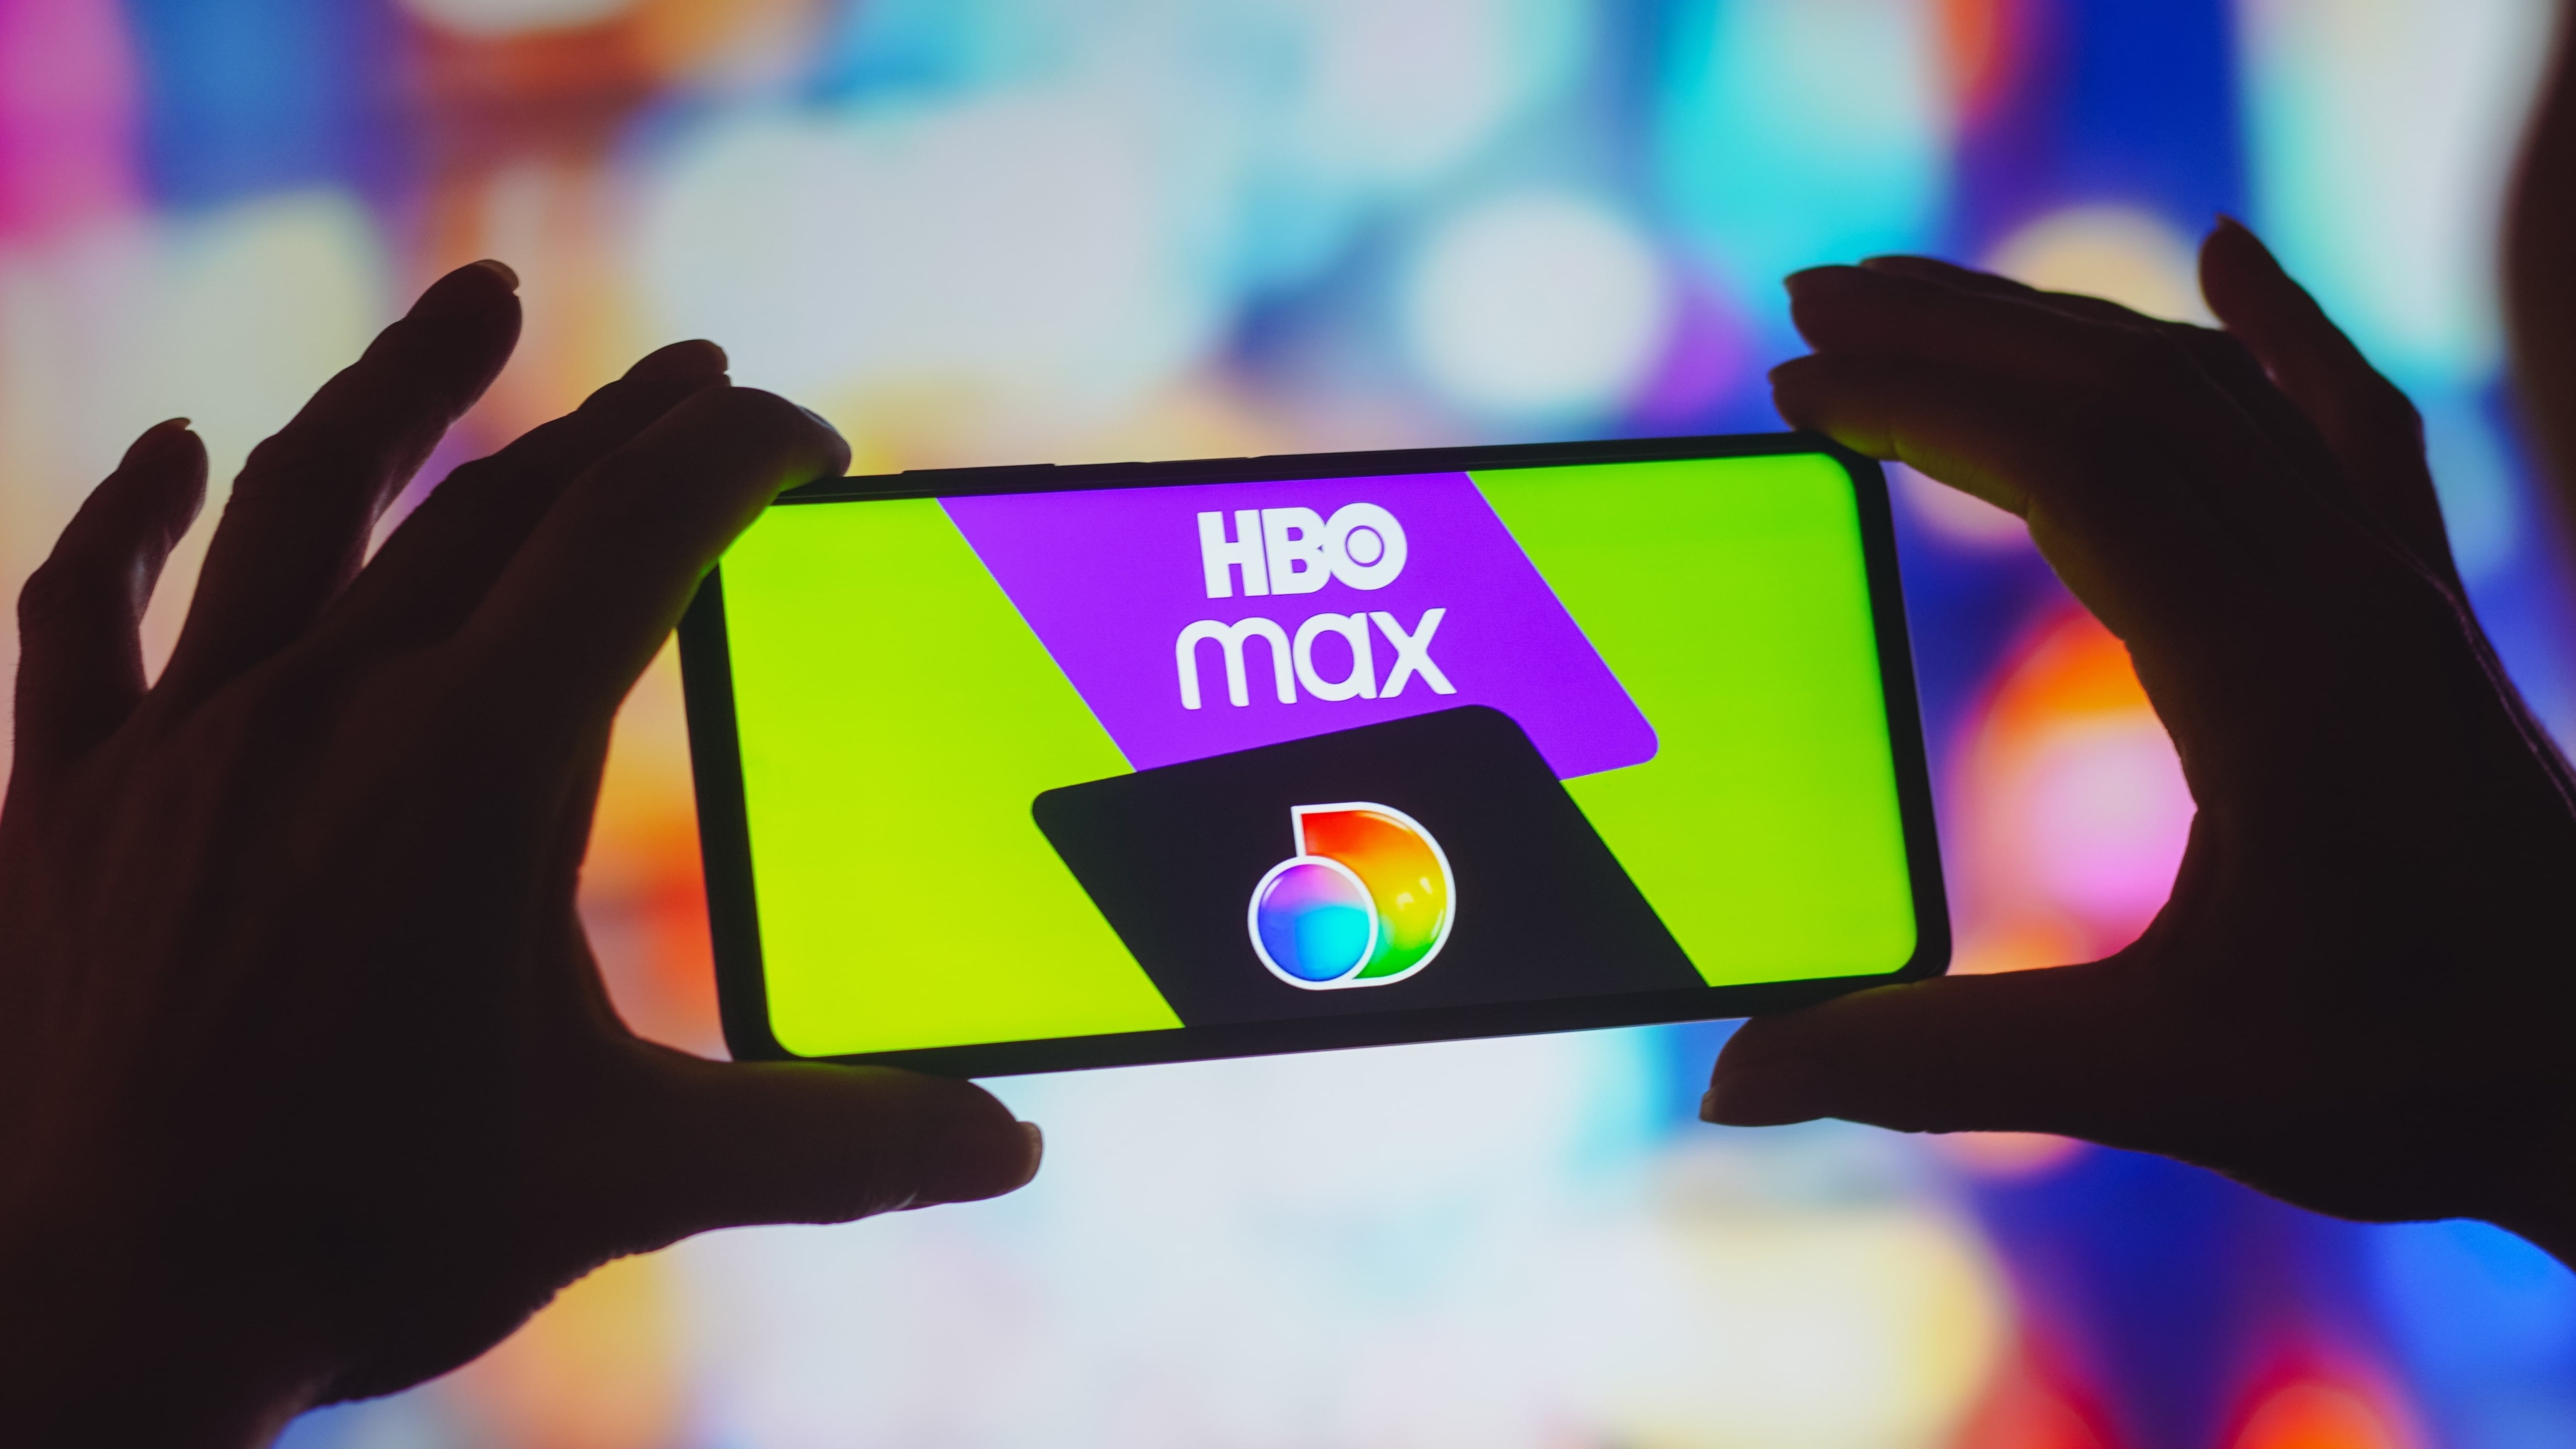 HBO Max and Discovery Plus logo on smartphone screen